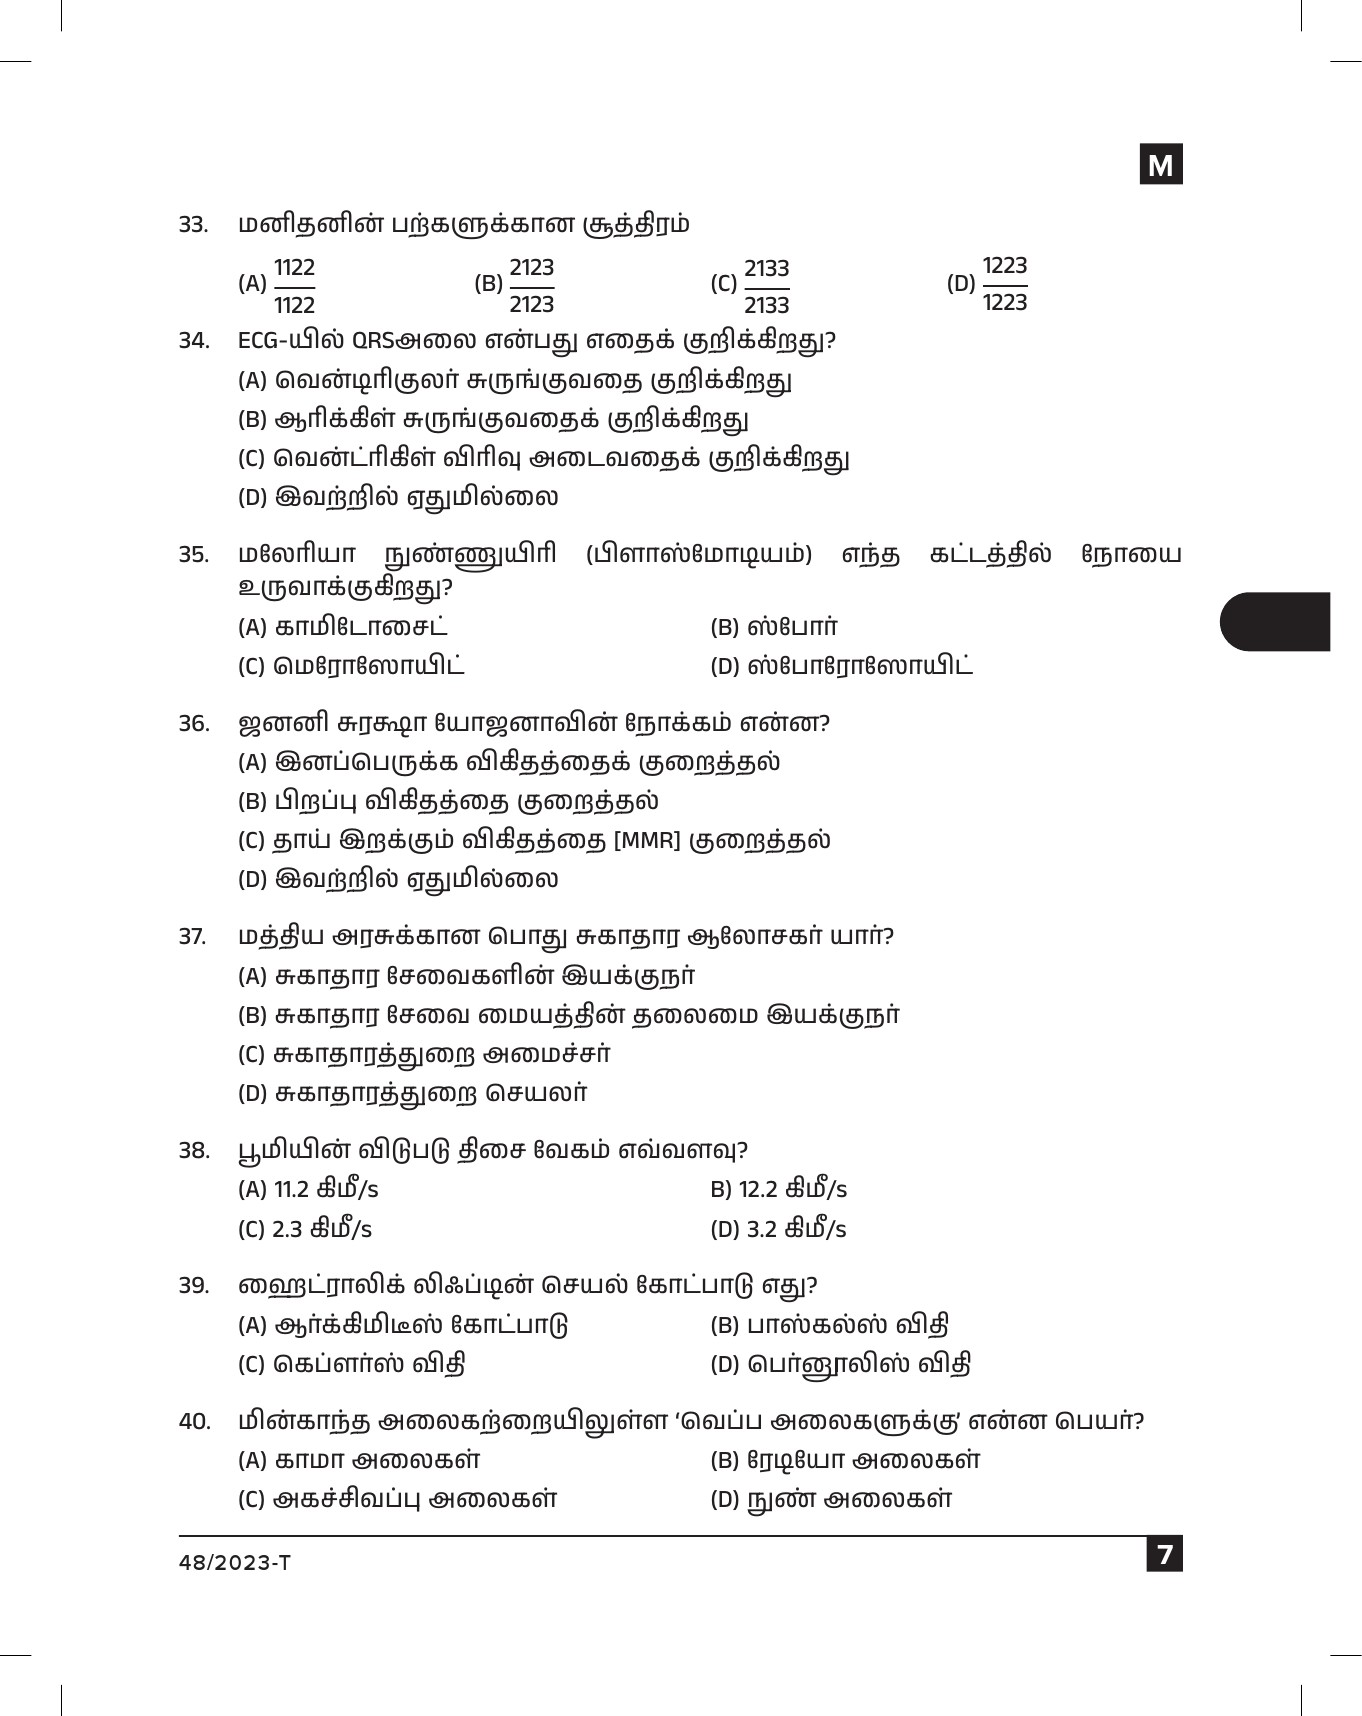 KPSC Fire and Rescue Officer Tamil Exam 2023 Code 0482023 T 6